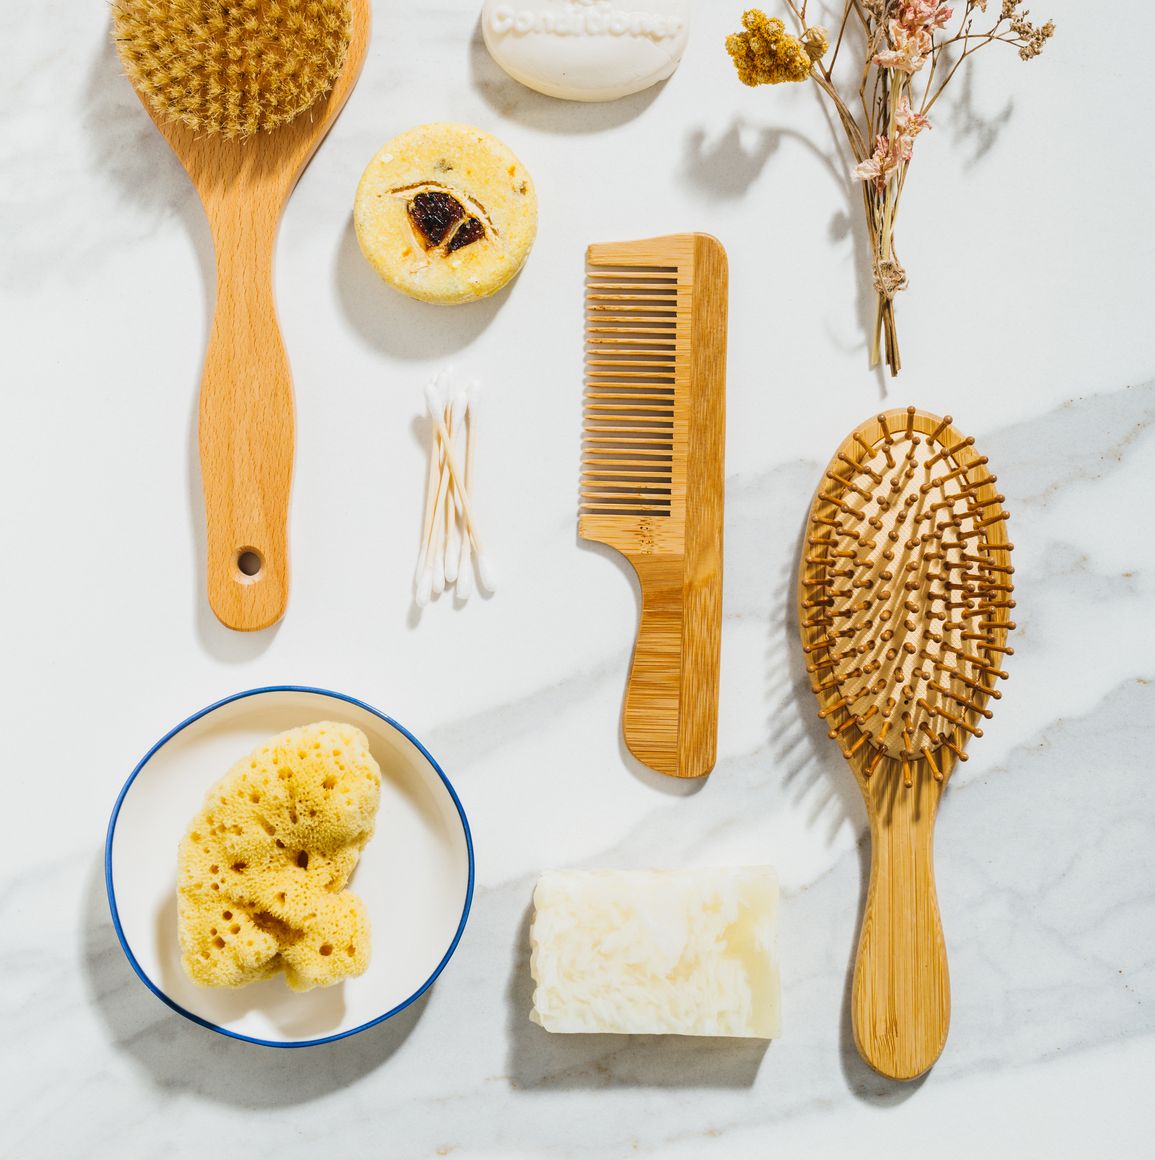 How to Clean a Hair Brush in 2022 - Easy Ways to Sanitize Brushes